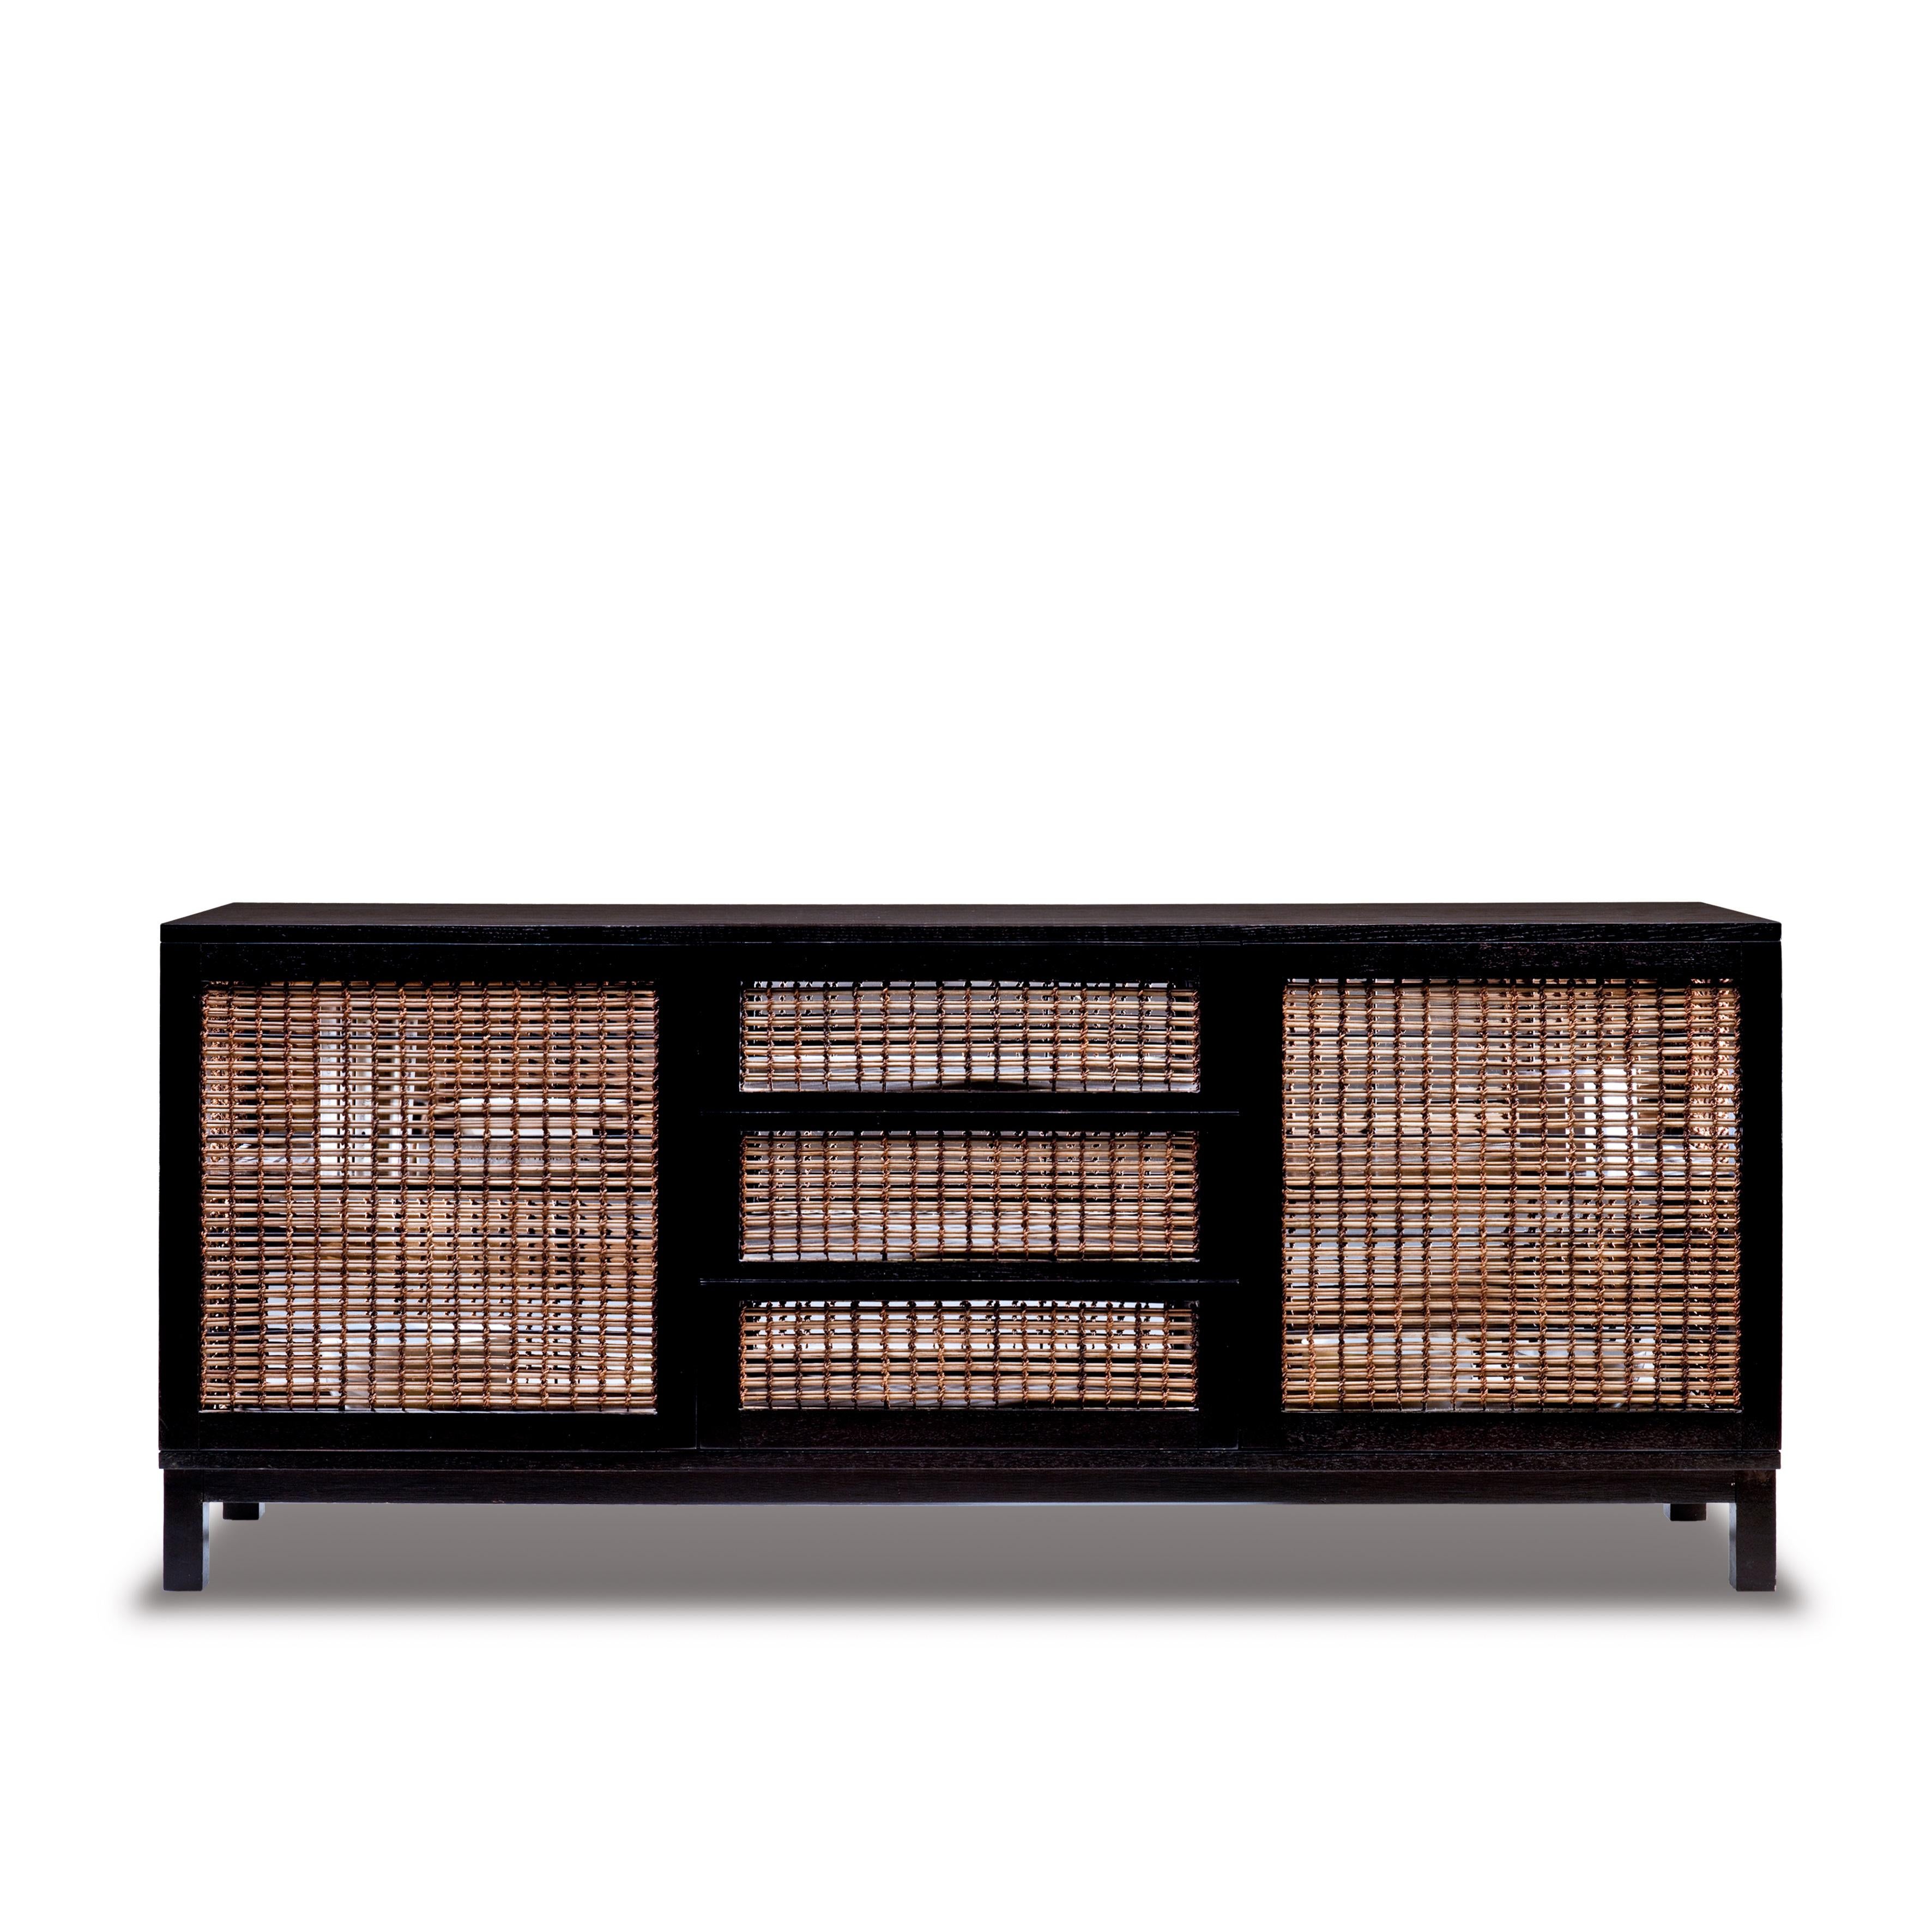 Walnut suzy wong buffet cabinet by Kenneth Cobonpue.
Materials: Lampakanai, rattan, walnut. 
Also available in maple. 
Dimensions: 50 cm x 180 cm x H 77 cm

Woven panels create a feeling of intimacy as you and your guests indulge in